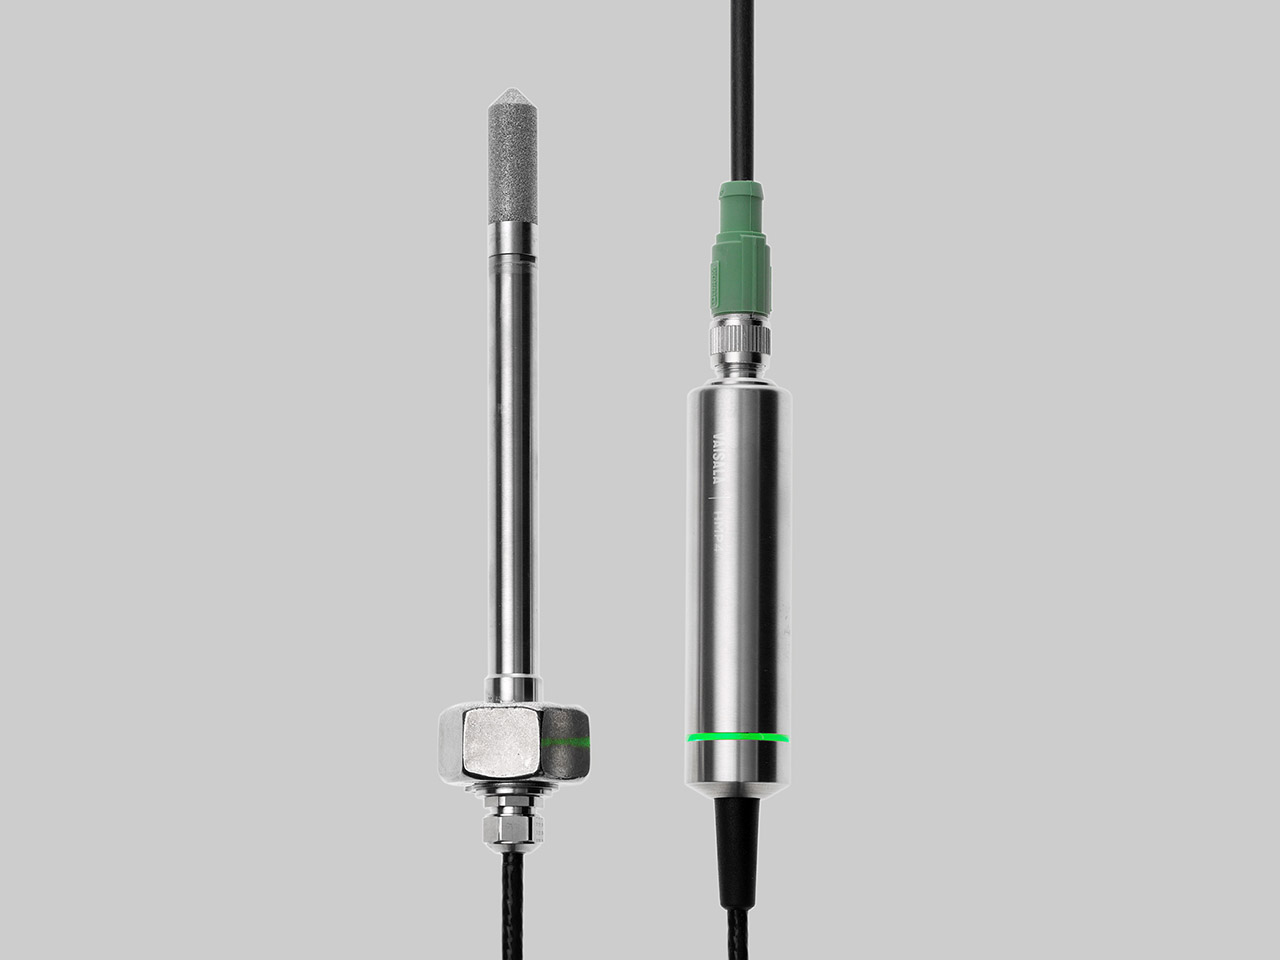 Vaisala HUMICAP® Humidity and Temperature Probe HMP4 is designed for high-pressure applications